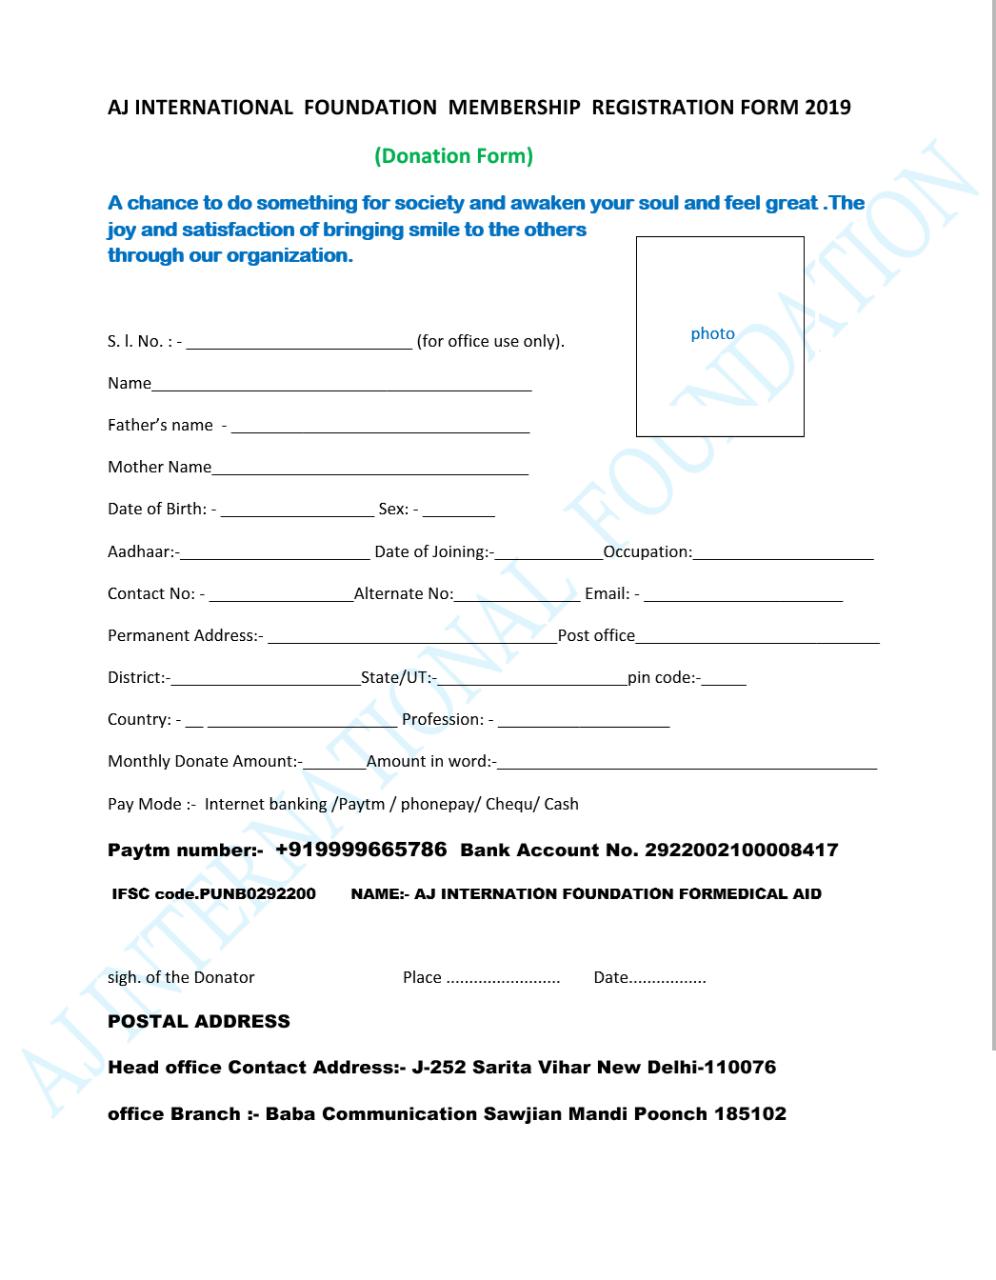 DONATE FORM